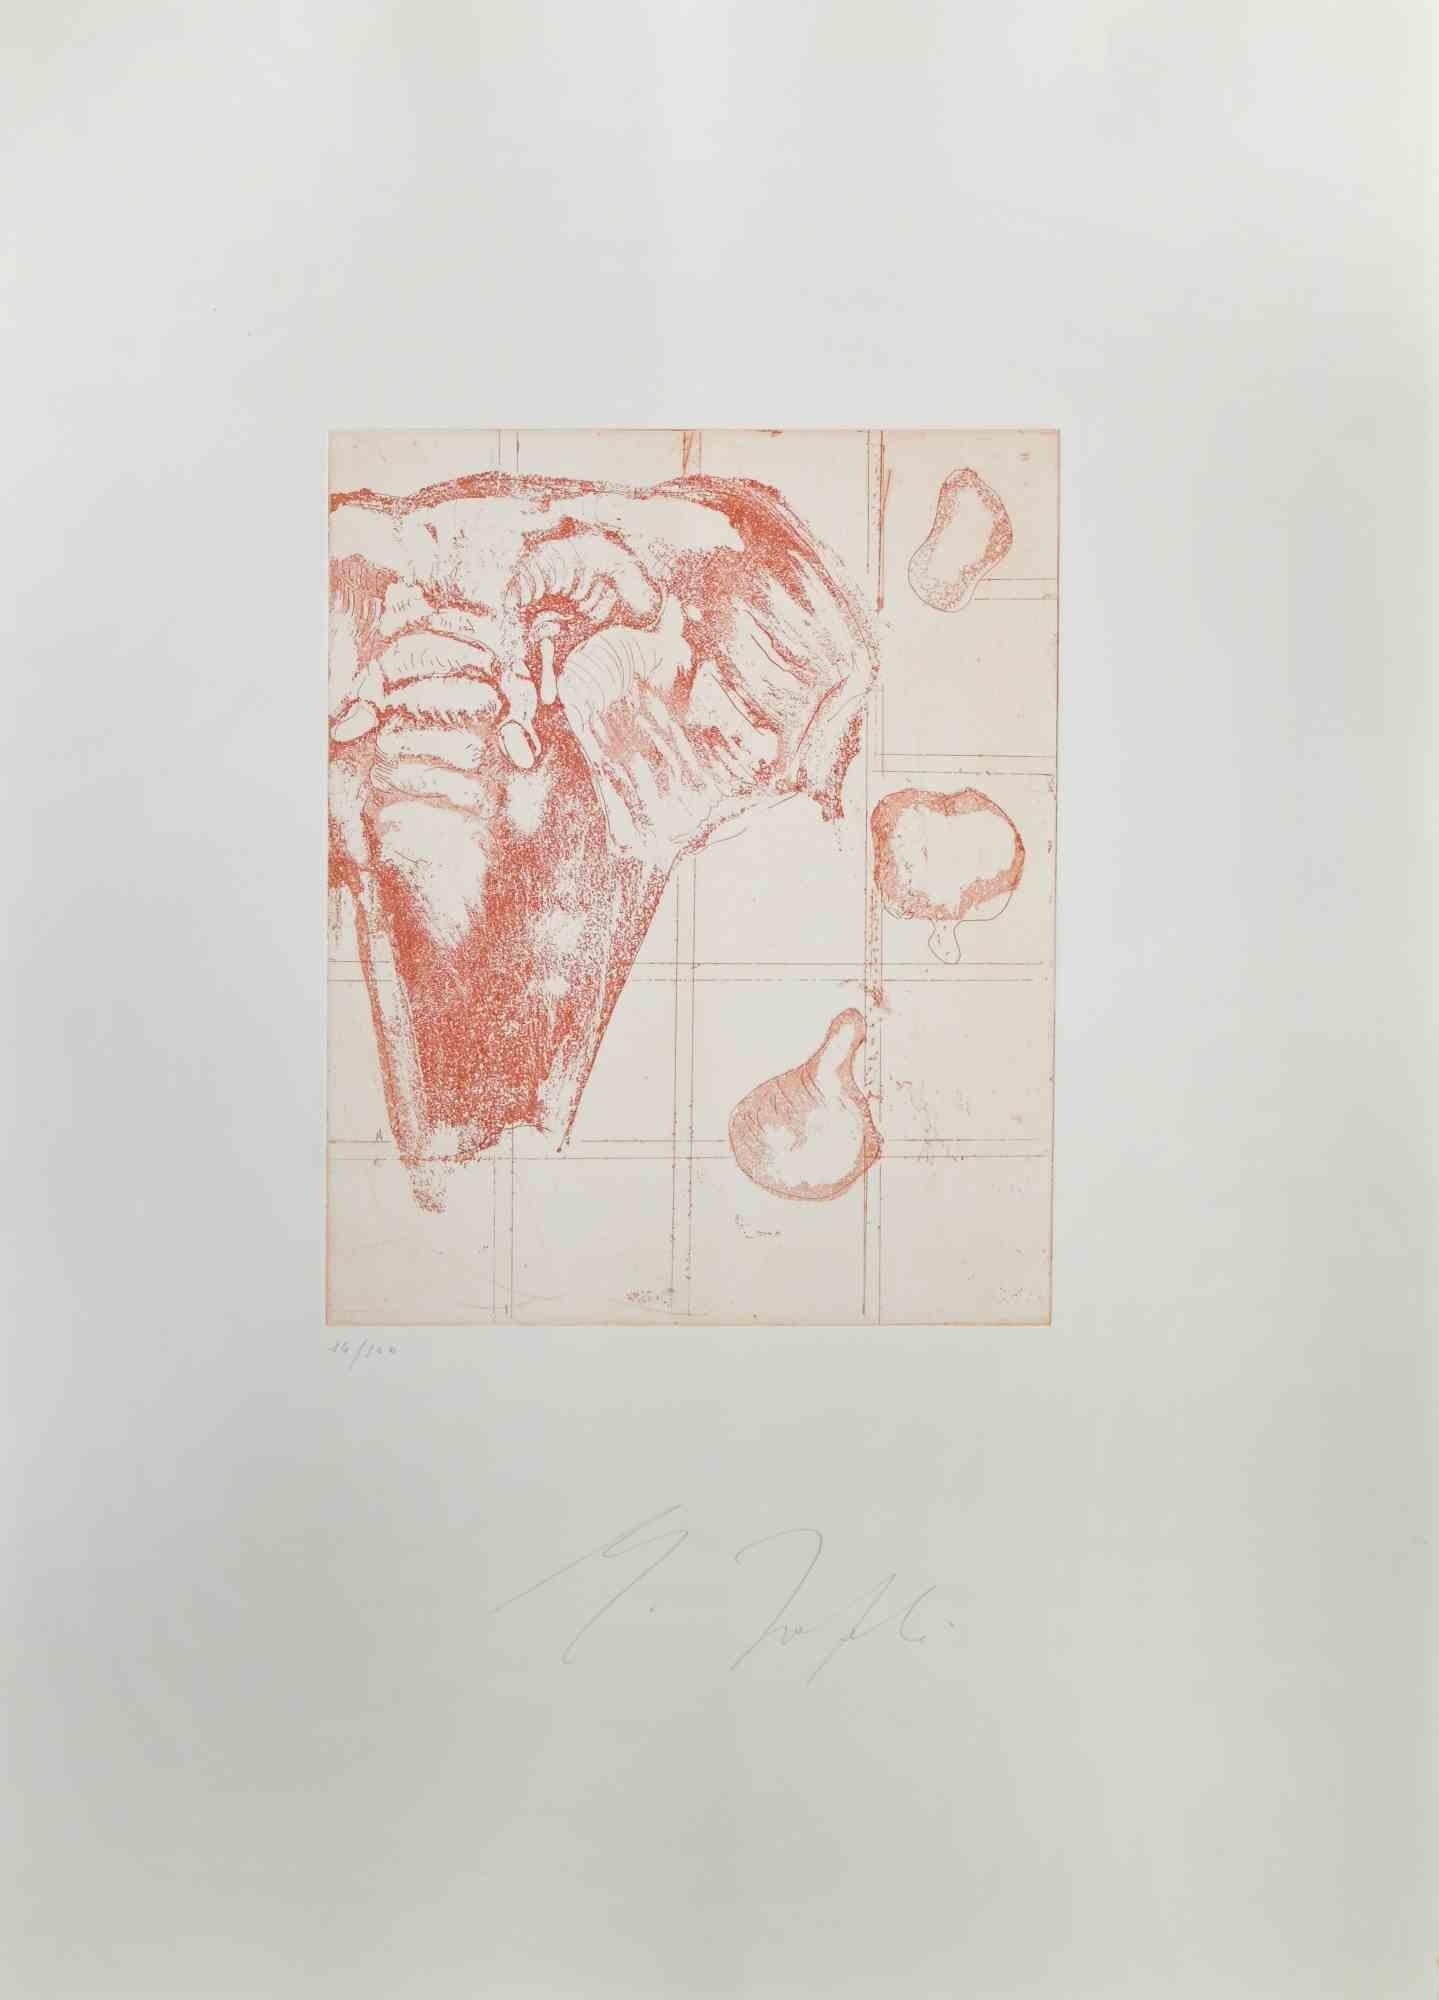 Etching, numbered and signed, by the Italian artist Mino Trafeli (Volterra, Italy 1922-2018).

His path is a continuous reflection on the work of art (object, sculpture, assembly), which led him to experiment with every form of artistic expression